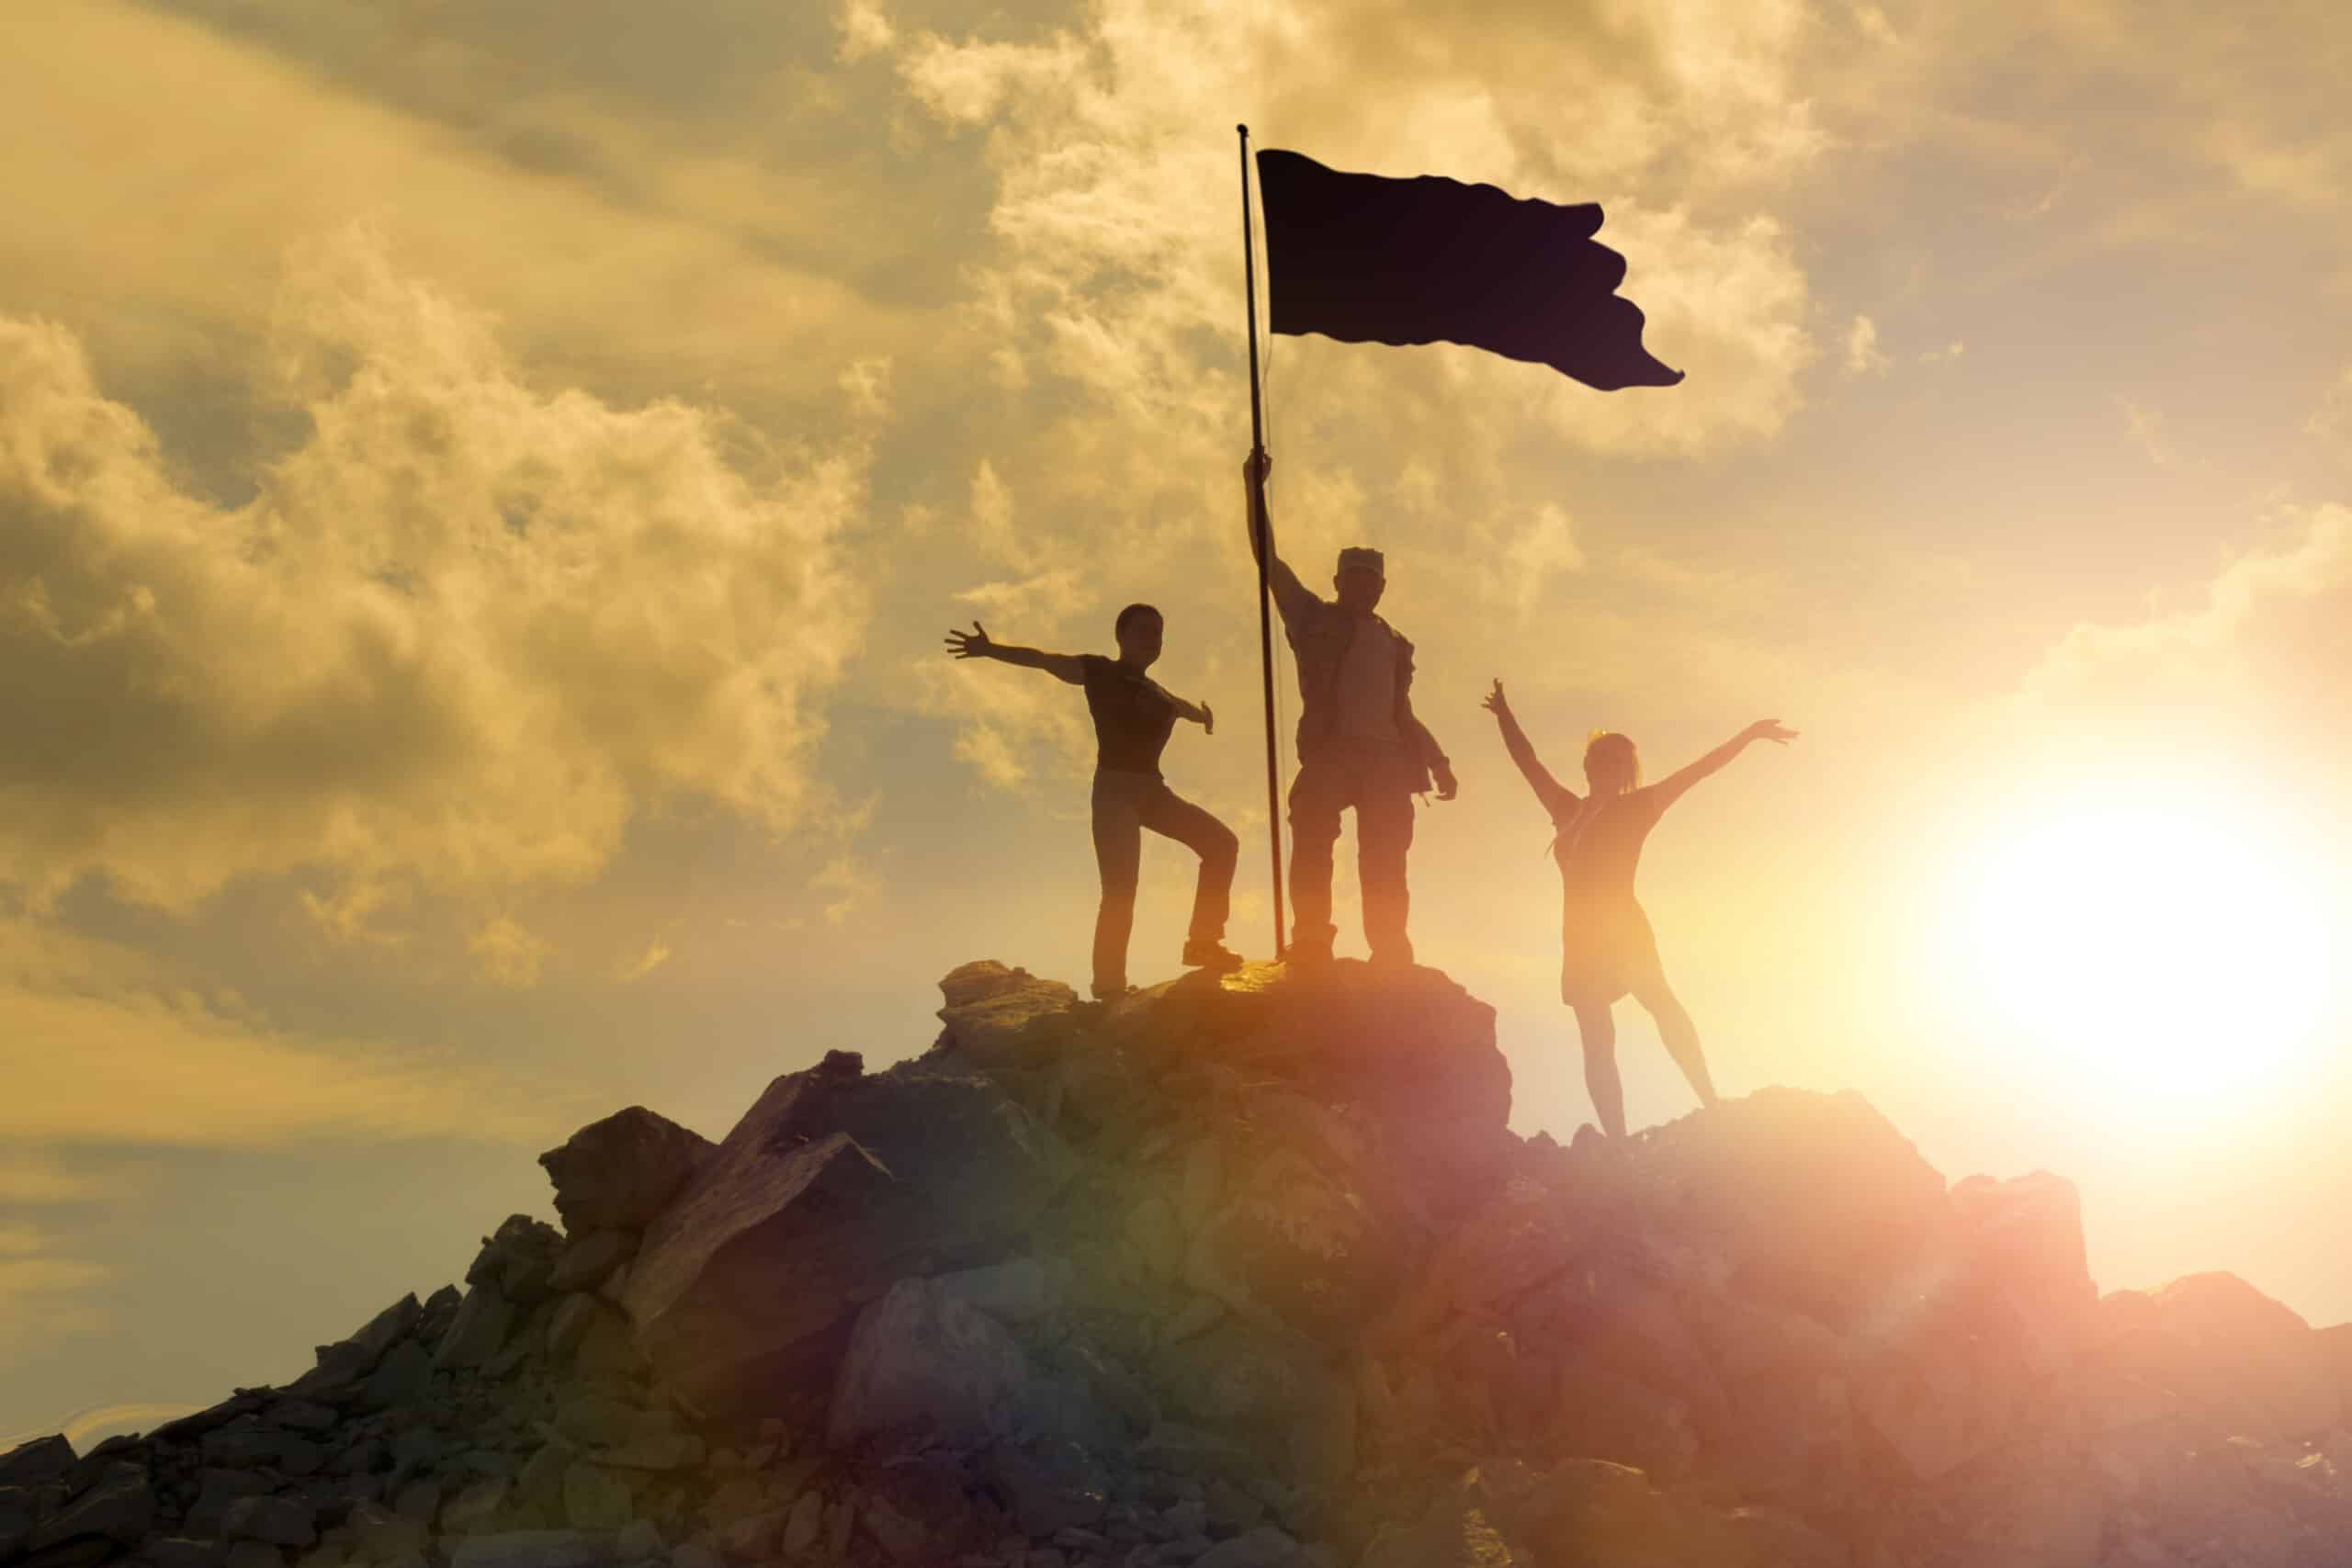 Three people standing on top of a mountain with an innovation flag.